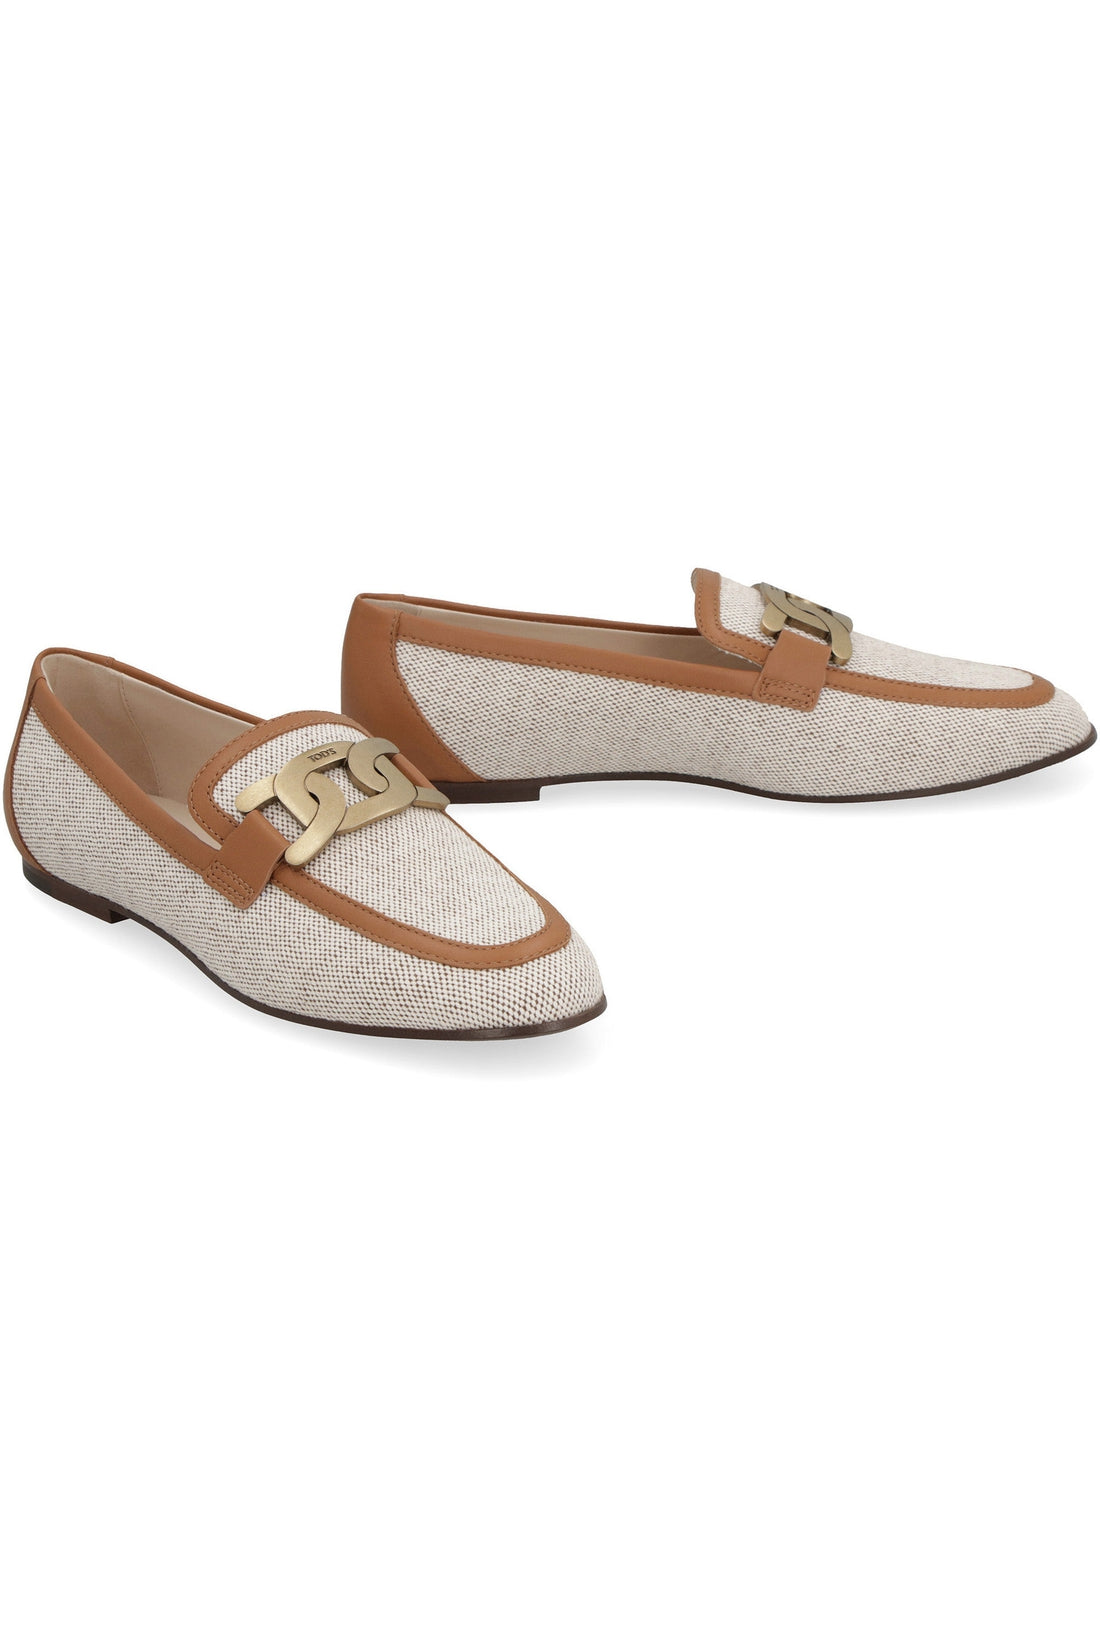 Tod's-OUTLET-SALE-Kate canvas and leather loafers-ARCHIVIST